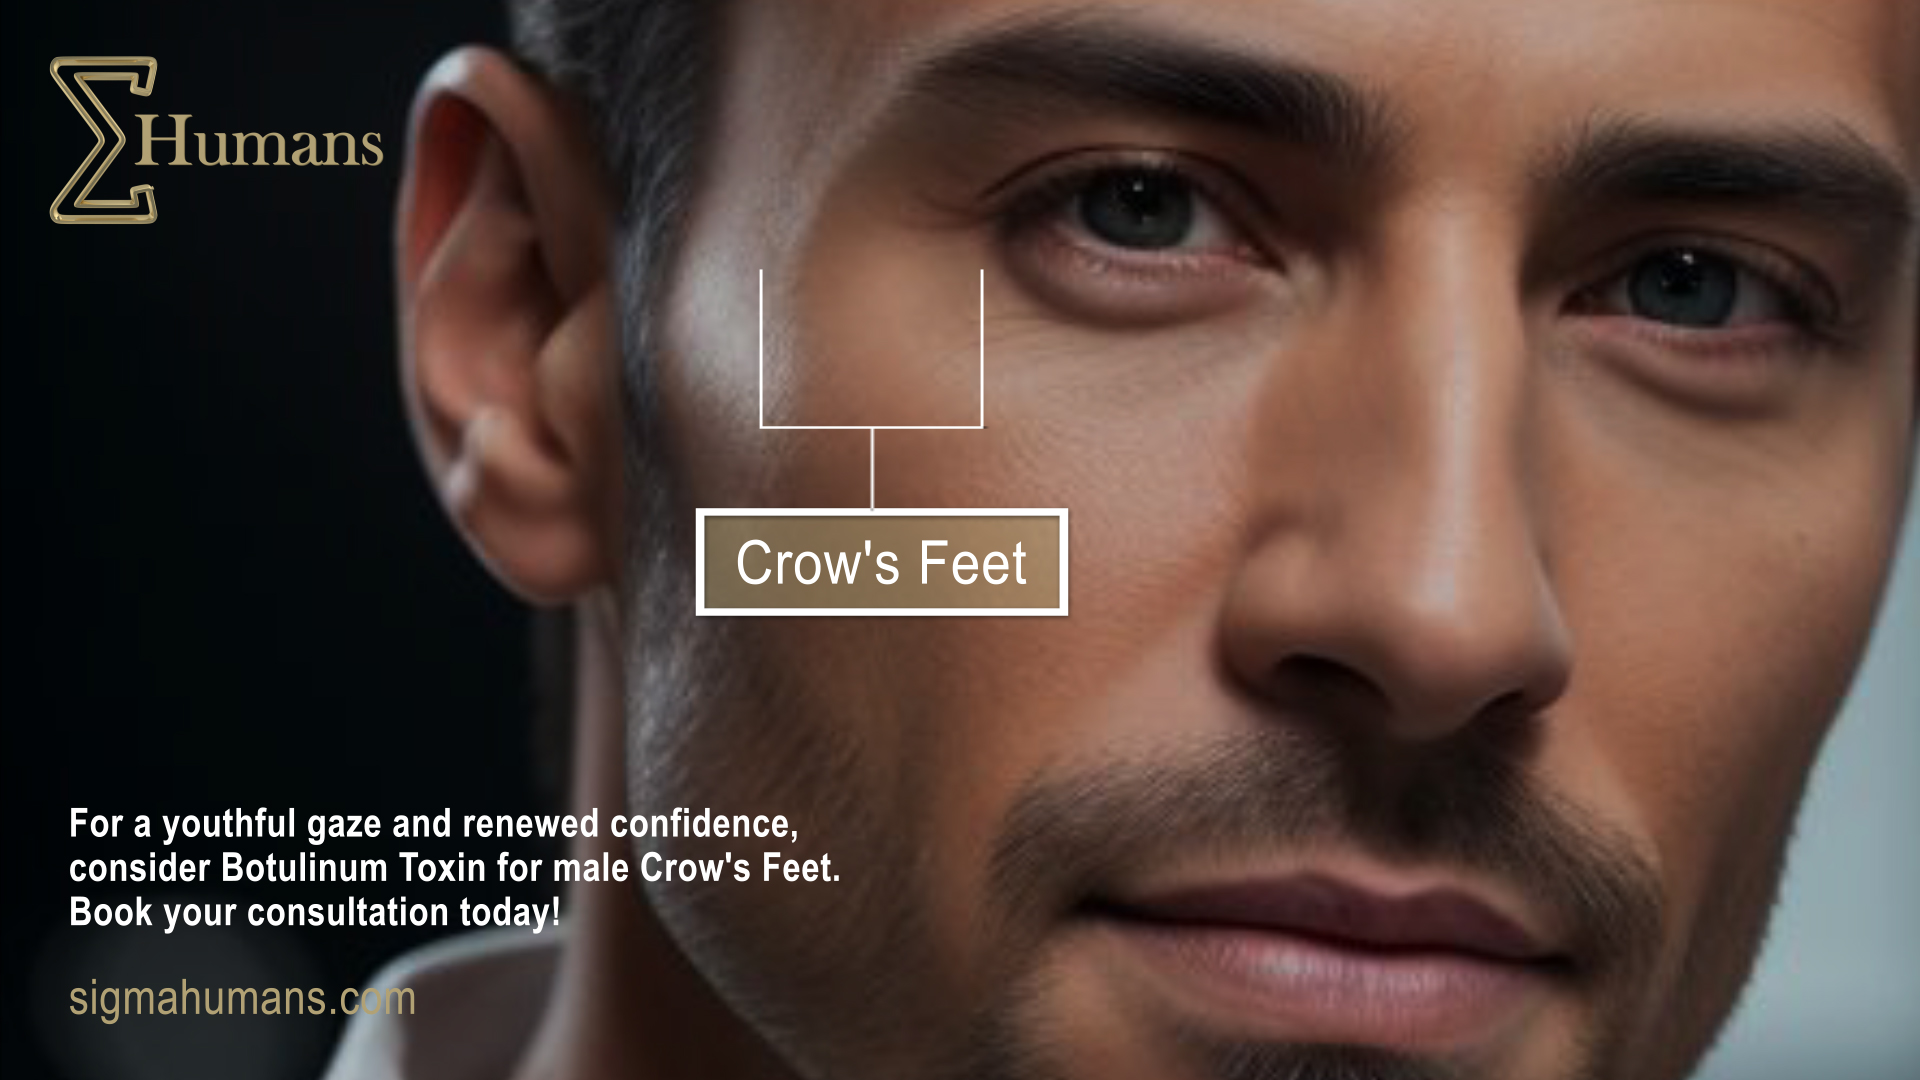 Crows Feet Crows Feet Botulinum Toxin Tailored Approach for Men Botulinum Toxin 2